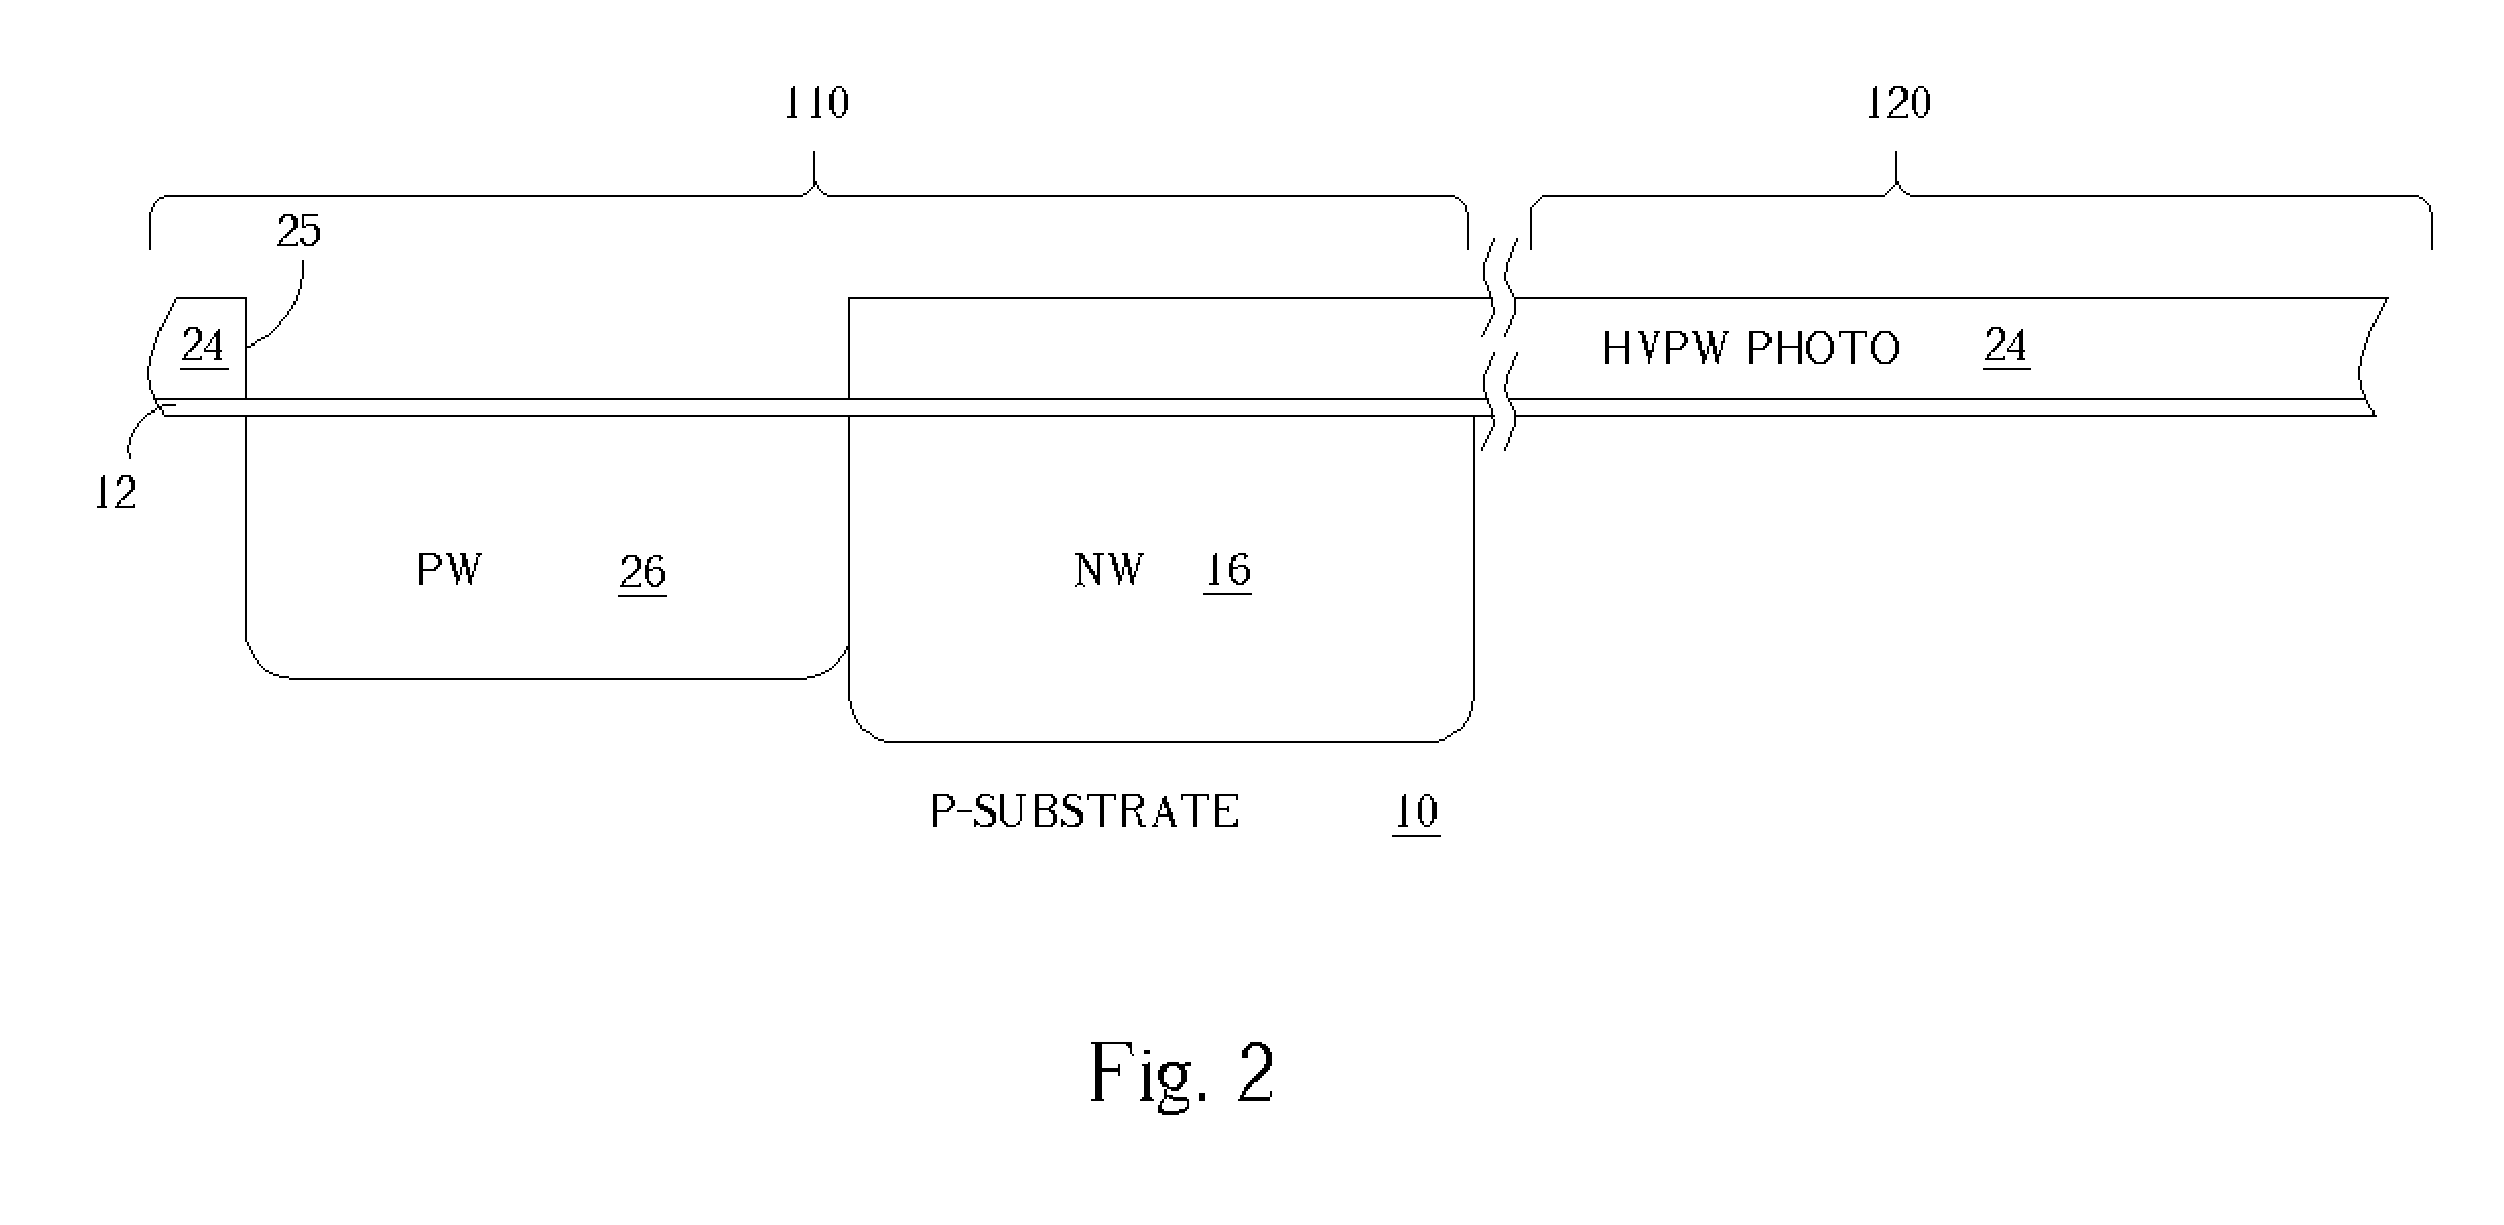 Method for fabricating integrated circuits having both high voltage and low voltage devices